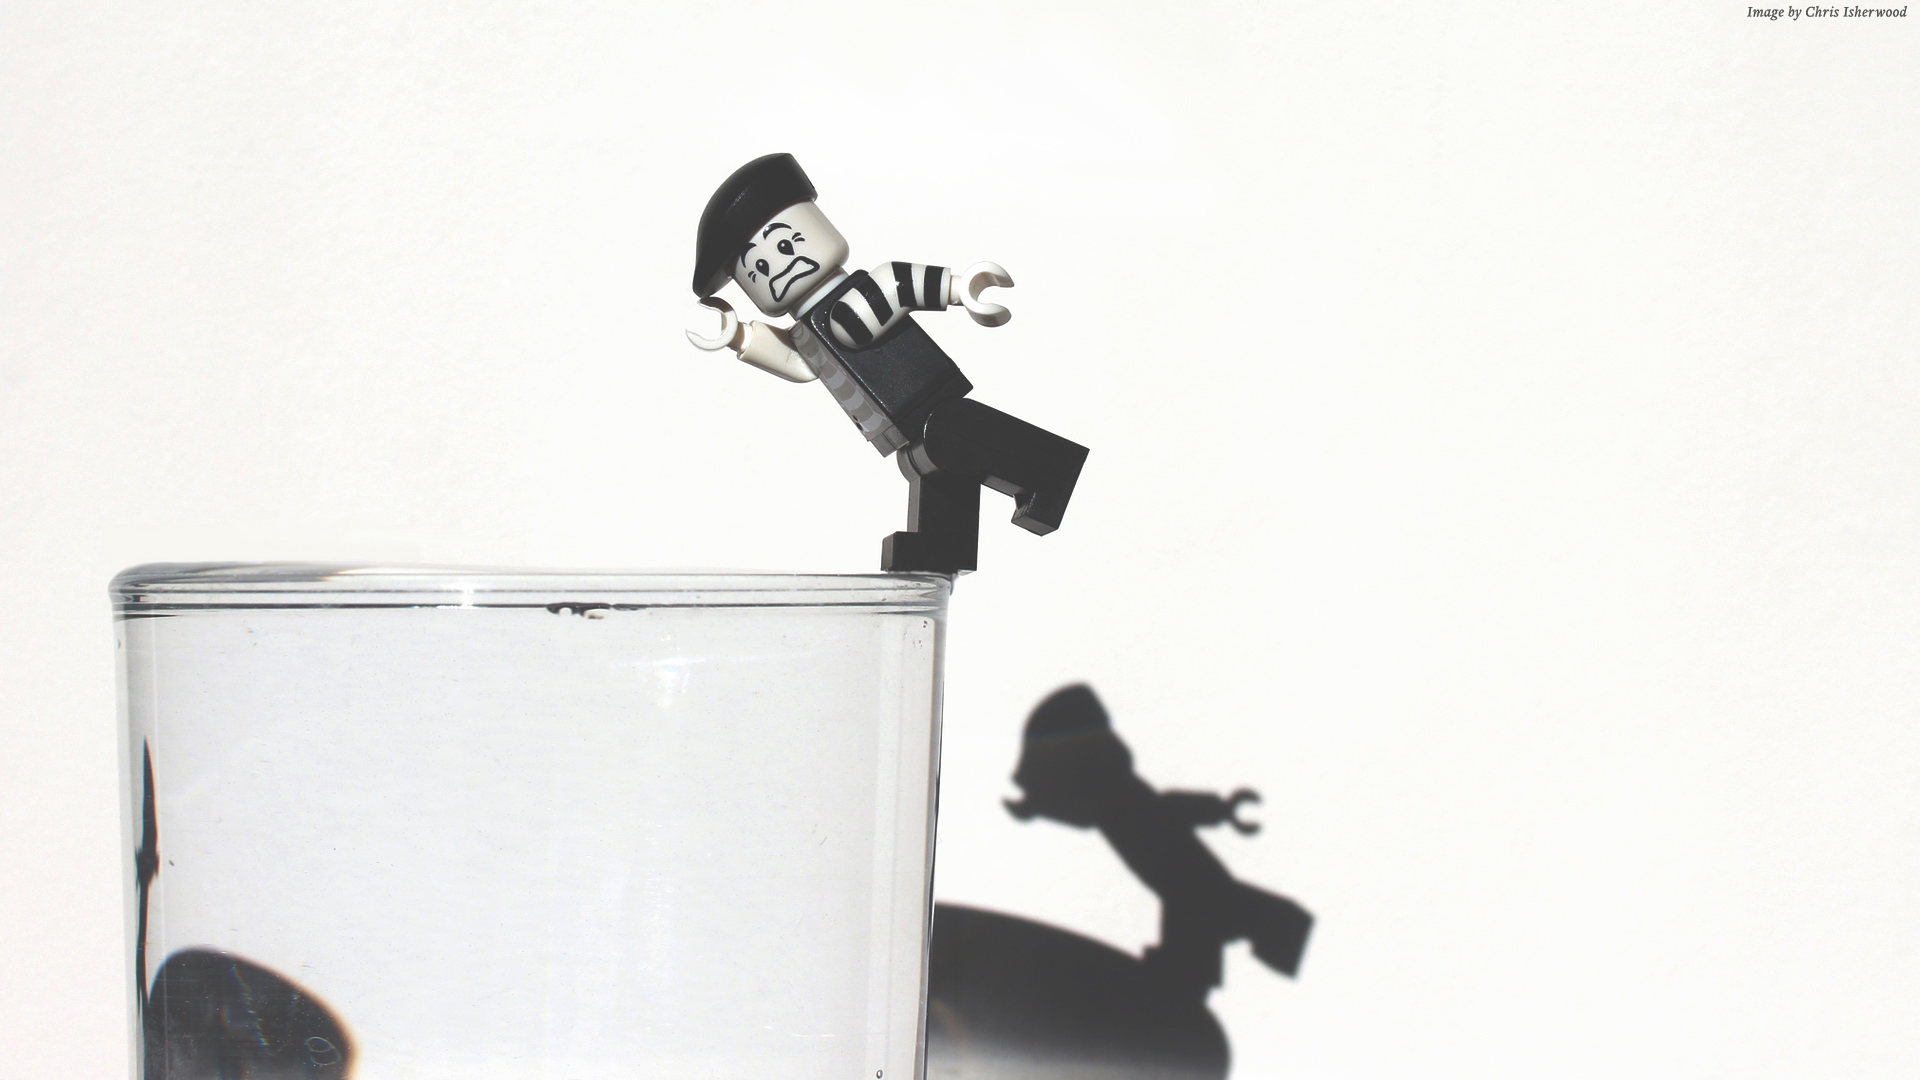 Lego mime falling into a glass of water